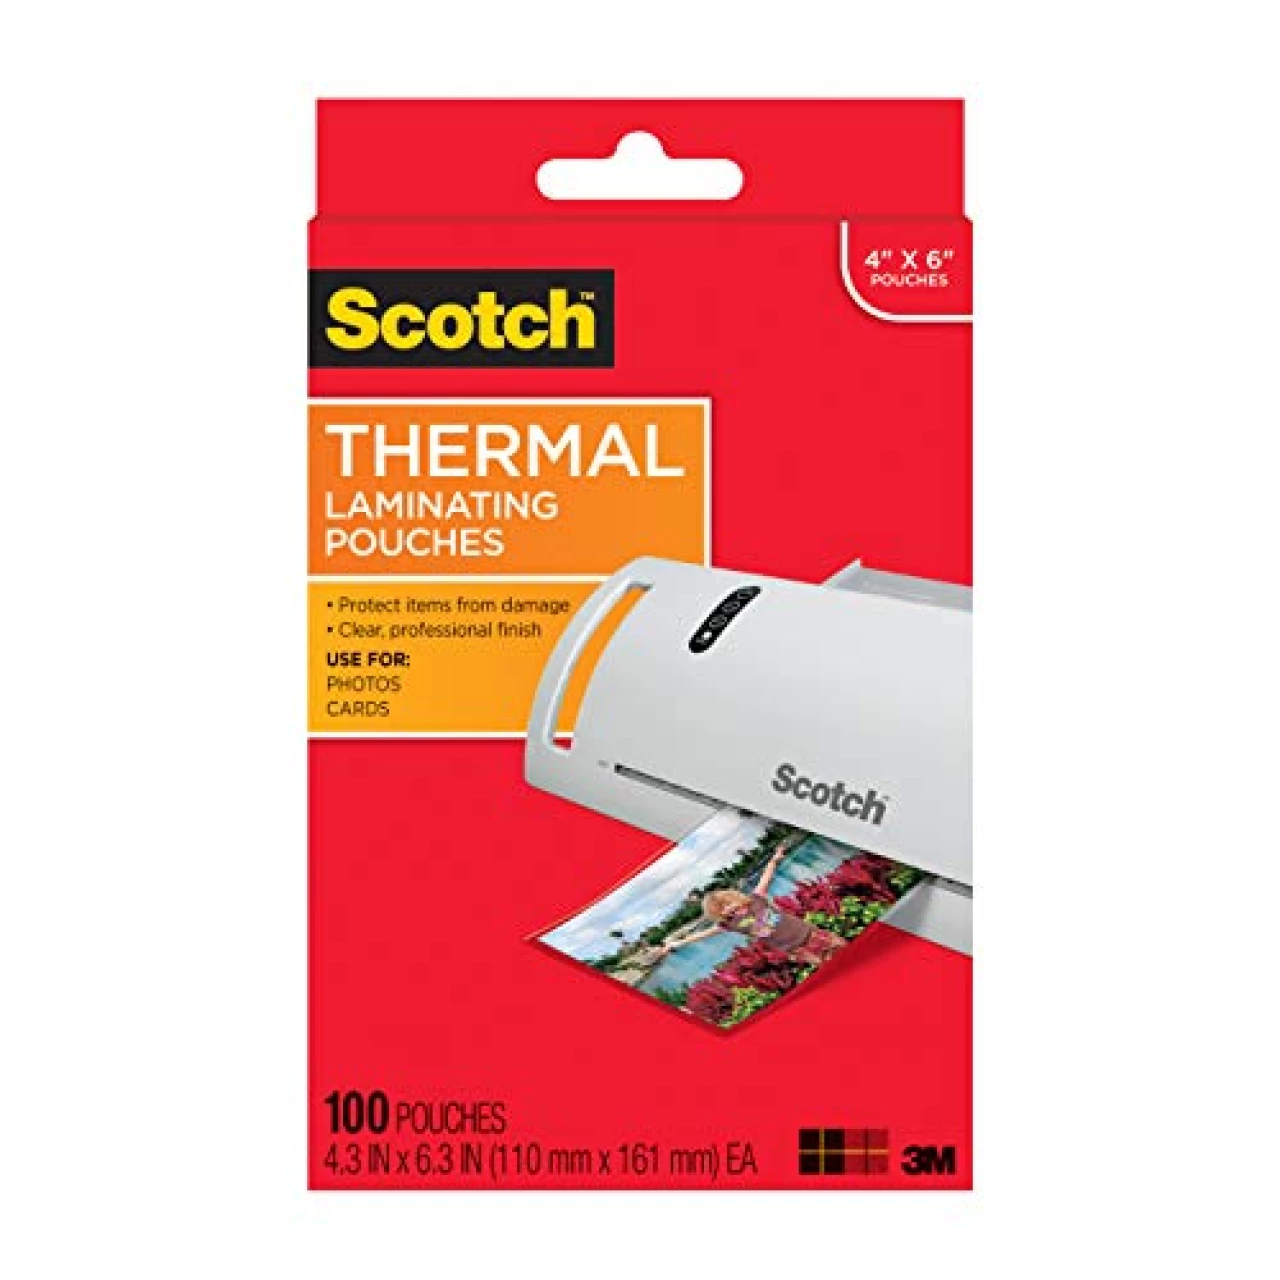 Scotch Thermal Laminating Pouches, 100 Count, Clear, 5 mil., Laminate Business Cards, Banners and Essays, Ideal Office or School Supplies, Fits Photo Sized (4.3 in. × 6.3 in.) Paper